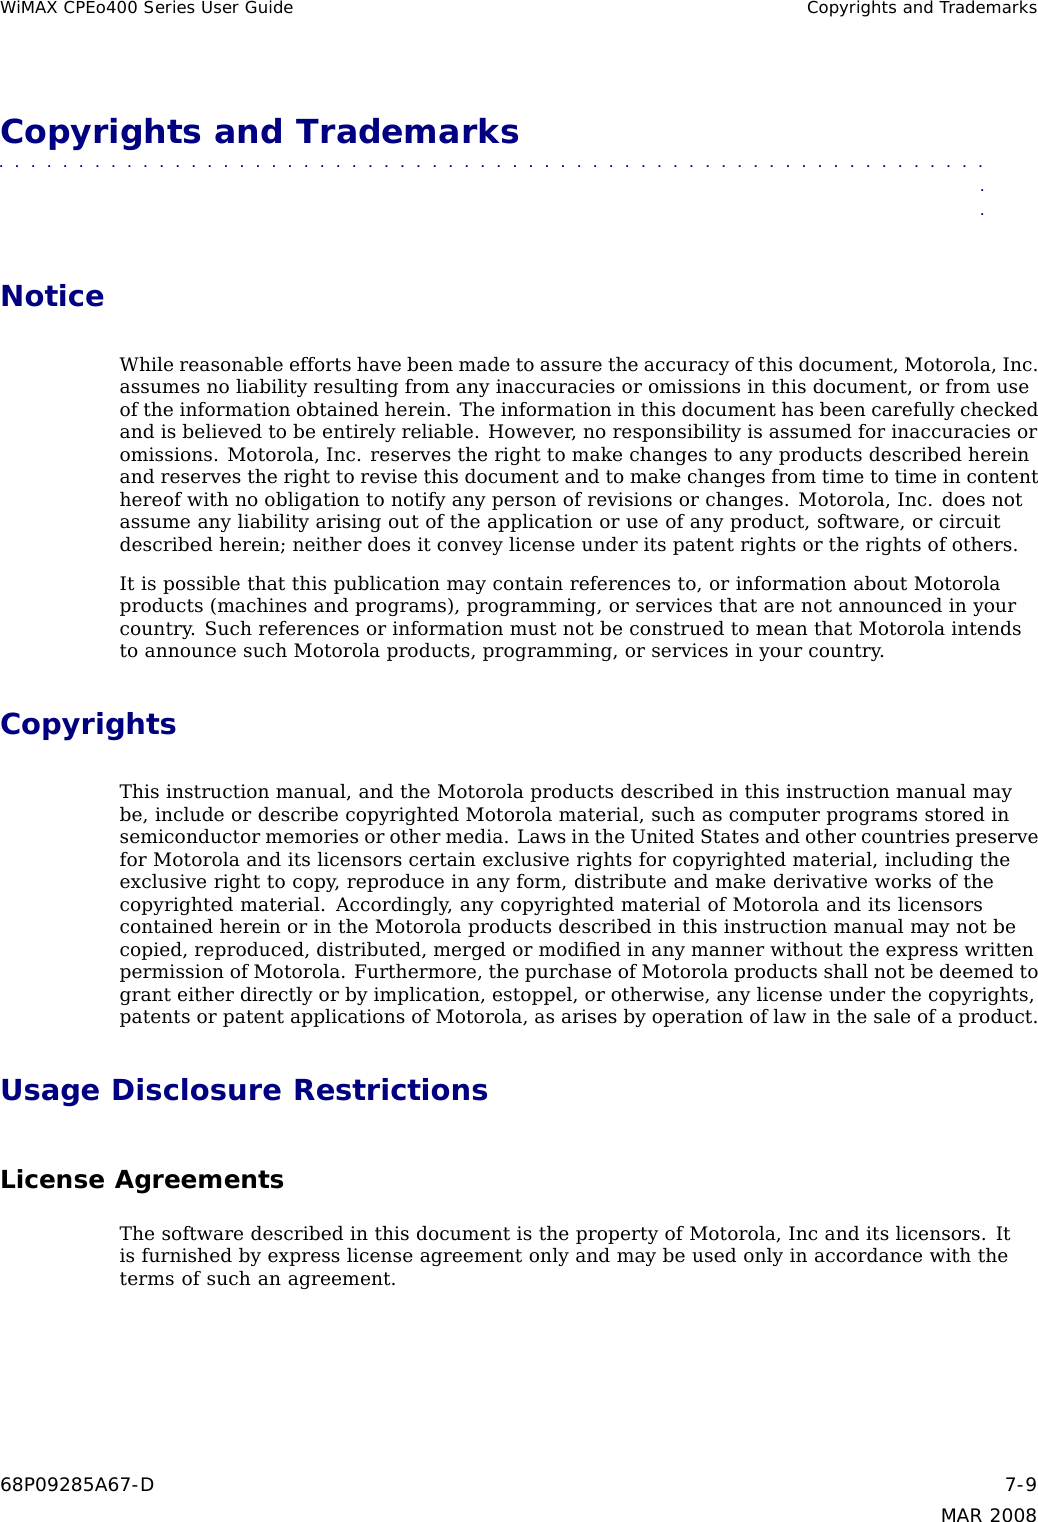 WiMAX CPEo400 Series User Guide Copyrights and TrademarksCopyrights and Trademarks■■■■■■■■■■ ■■■■■■■■■■■■■ ■■■■■■■■■■■■■ ■■■■■■■■■■■■■ ■■■■■■■■■■■■■■■NoticeWhile reasonable efforts have been made to assure the accuracy of this document, Motorola, Inc.assumes no liability resulting from any inaccuracies or omissions in this document, or from useof the information obtained herein. The information in this document has been carefully checkedand is believed to be entirely reliable. However, no responsibility is assumed for inaccuracies oromissions. Motorola, Inc. reserves the right to make changes to any products described hereinand reserves the right to revise this document and to make changes from time to time in contenthereof with no obligation to notify any person of revisions or changes. Motorola, Inc. does notassume any liability arising out of the application or use of any product, software, or circuitdescribed herein; neither does it convey license under its patent rights or the rights of others.It is possible that this publication may contain references to, or information about Motorolaproducts (machines and programs), programming, or services that are not announced in yourcountry. Such references or information must not be construed to mean that Motorola intendsto announce such Motorola products, programming, or services in your country.CopyrightsThis instruction manual, and the Motorola products described in this instruction manual maybe, include or describe copyrighted Motorola material, such as computer programs stored insemiconductor memories or other media. Laws in the United States and other countries preservefor Motorola and its licensors certain exclusive rights for copyrighted material, including theexclusive right to copy, reproduce in any form, distribute and make derivative works of thecopyrighted material. Accordingly, any copyrighted material of Motorola and its licensorscontained herein or in the Motorola products described in this instruction manual may not becopied, reproduced, distributed, merged or modiﬁed in any manner without the express writtenpermission of Motorola. Furthermore, the purchase of Motorola products shall not be deemed togrant either directly or by implication, estoppel, or otherwise, any license under the copyrights,patents or patent applications of Motorola, as arises by operation of law in the sale of a product.Usage Disclosure RestrictionsLicense AgreementsThe software described in this document is the property of Motorola, Inc and its licensors. Itis furnished by express license agreement only and may be used only in accordance with thetermsofsuchanagreement.68P09285A67-D 7-9MAR 2008